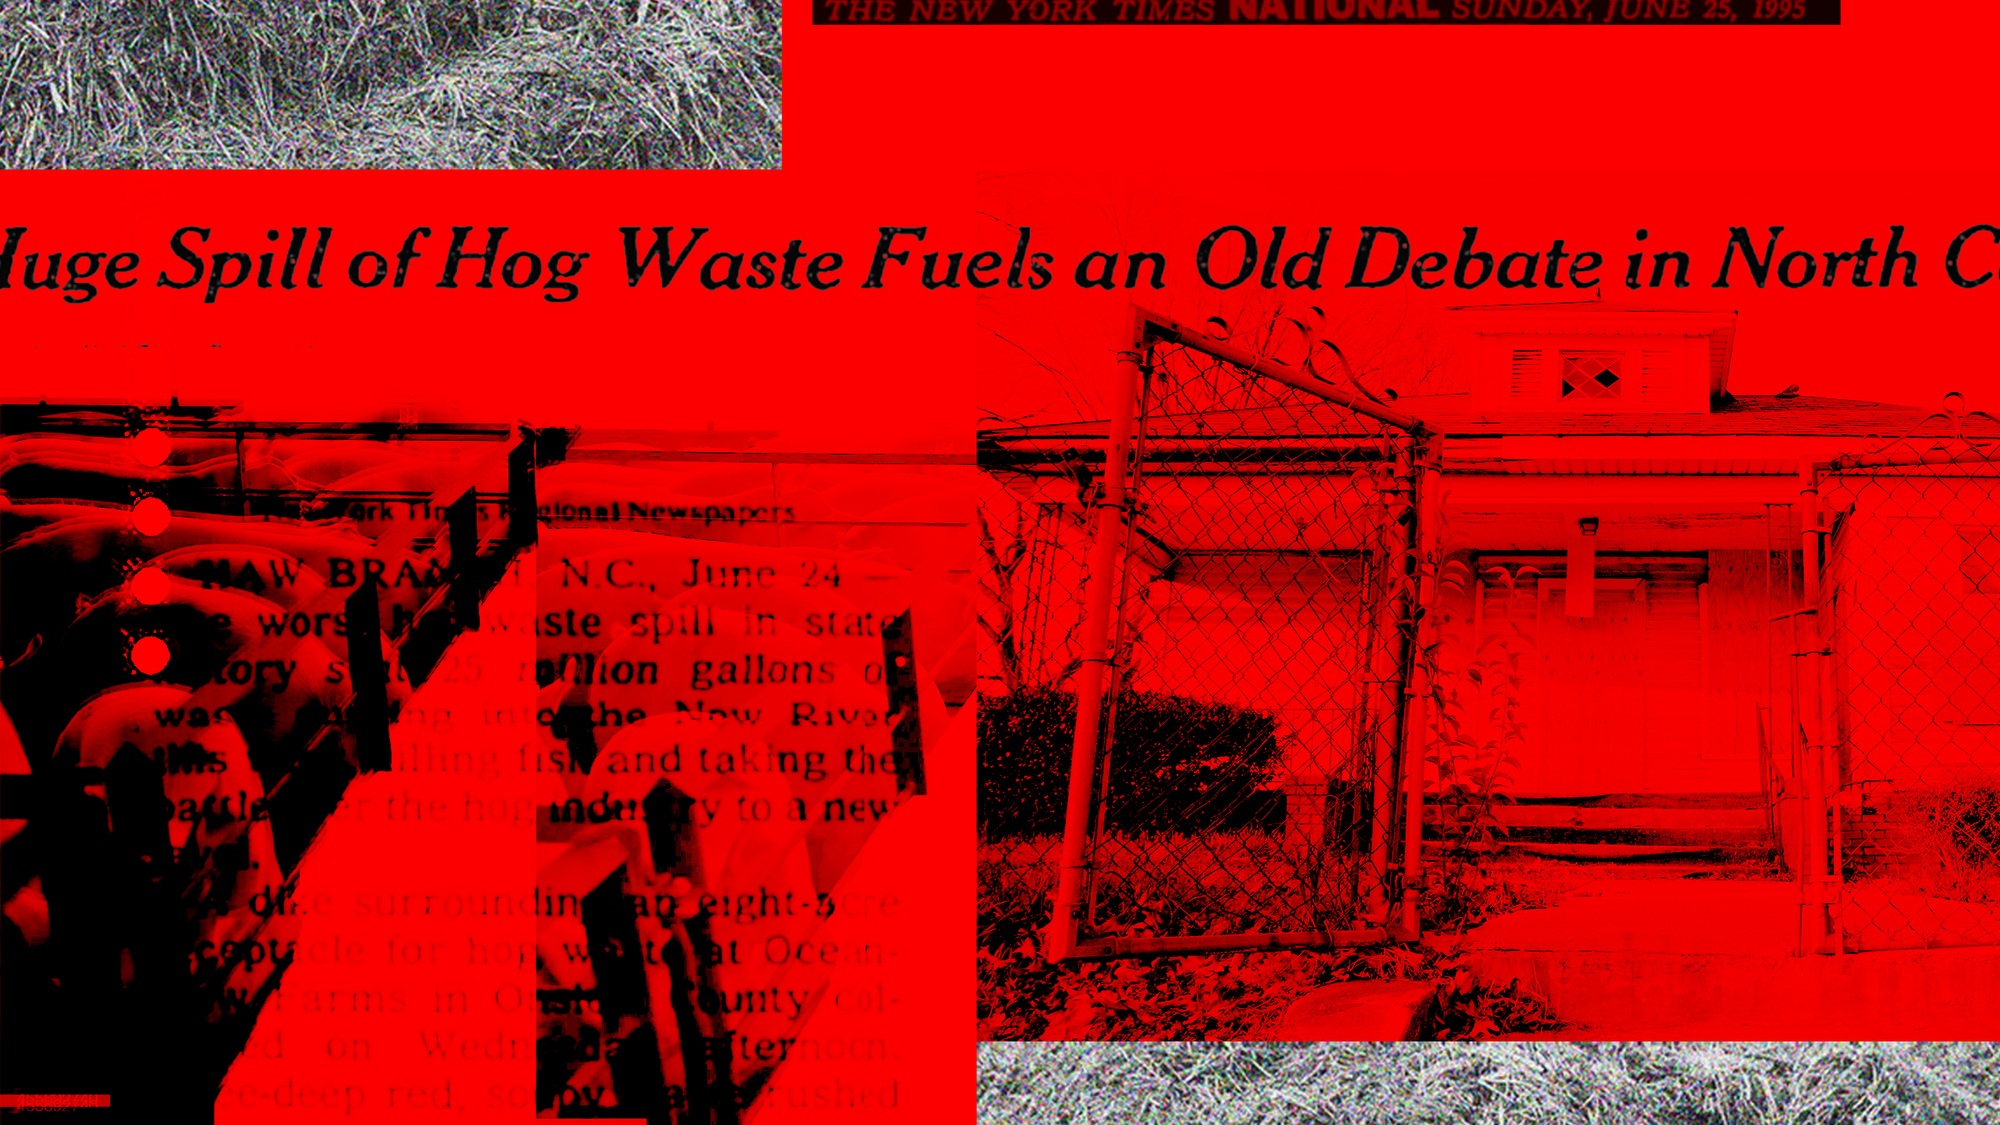 A red graphic of pigs crowded, a house with a fence, and gray manure with a new york times headline above April 2022.